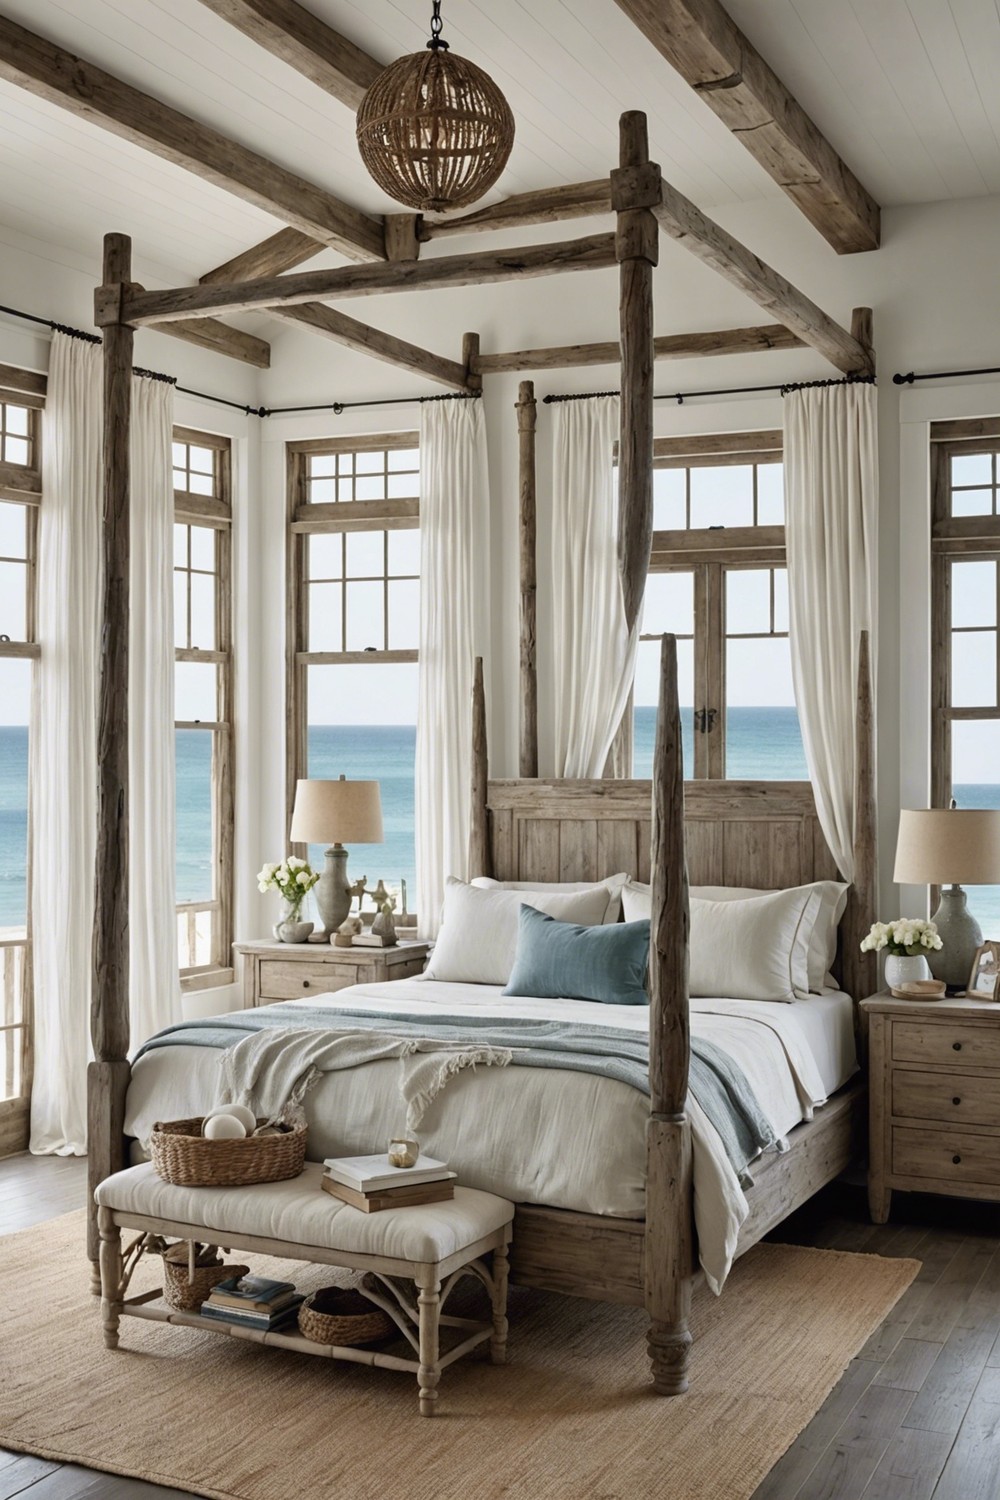 Weathered Wood Furniture for a Beachy Look